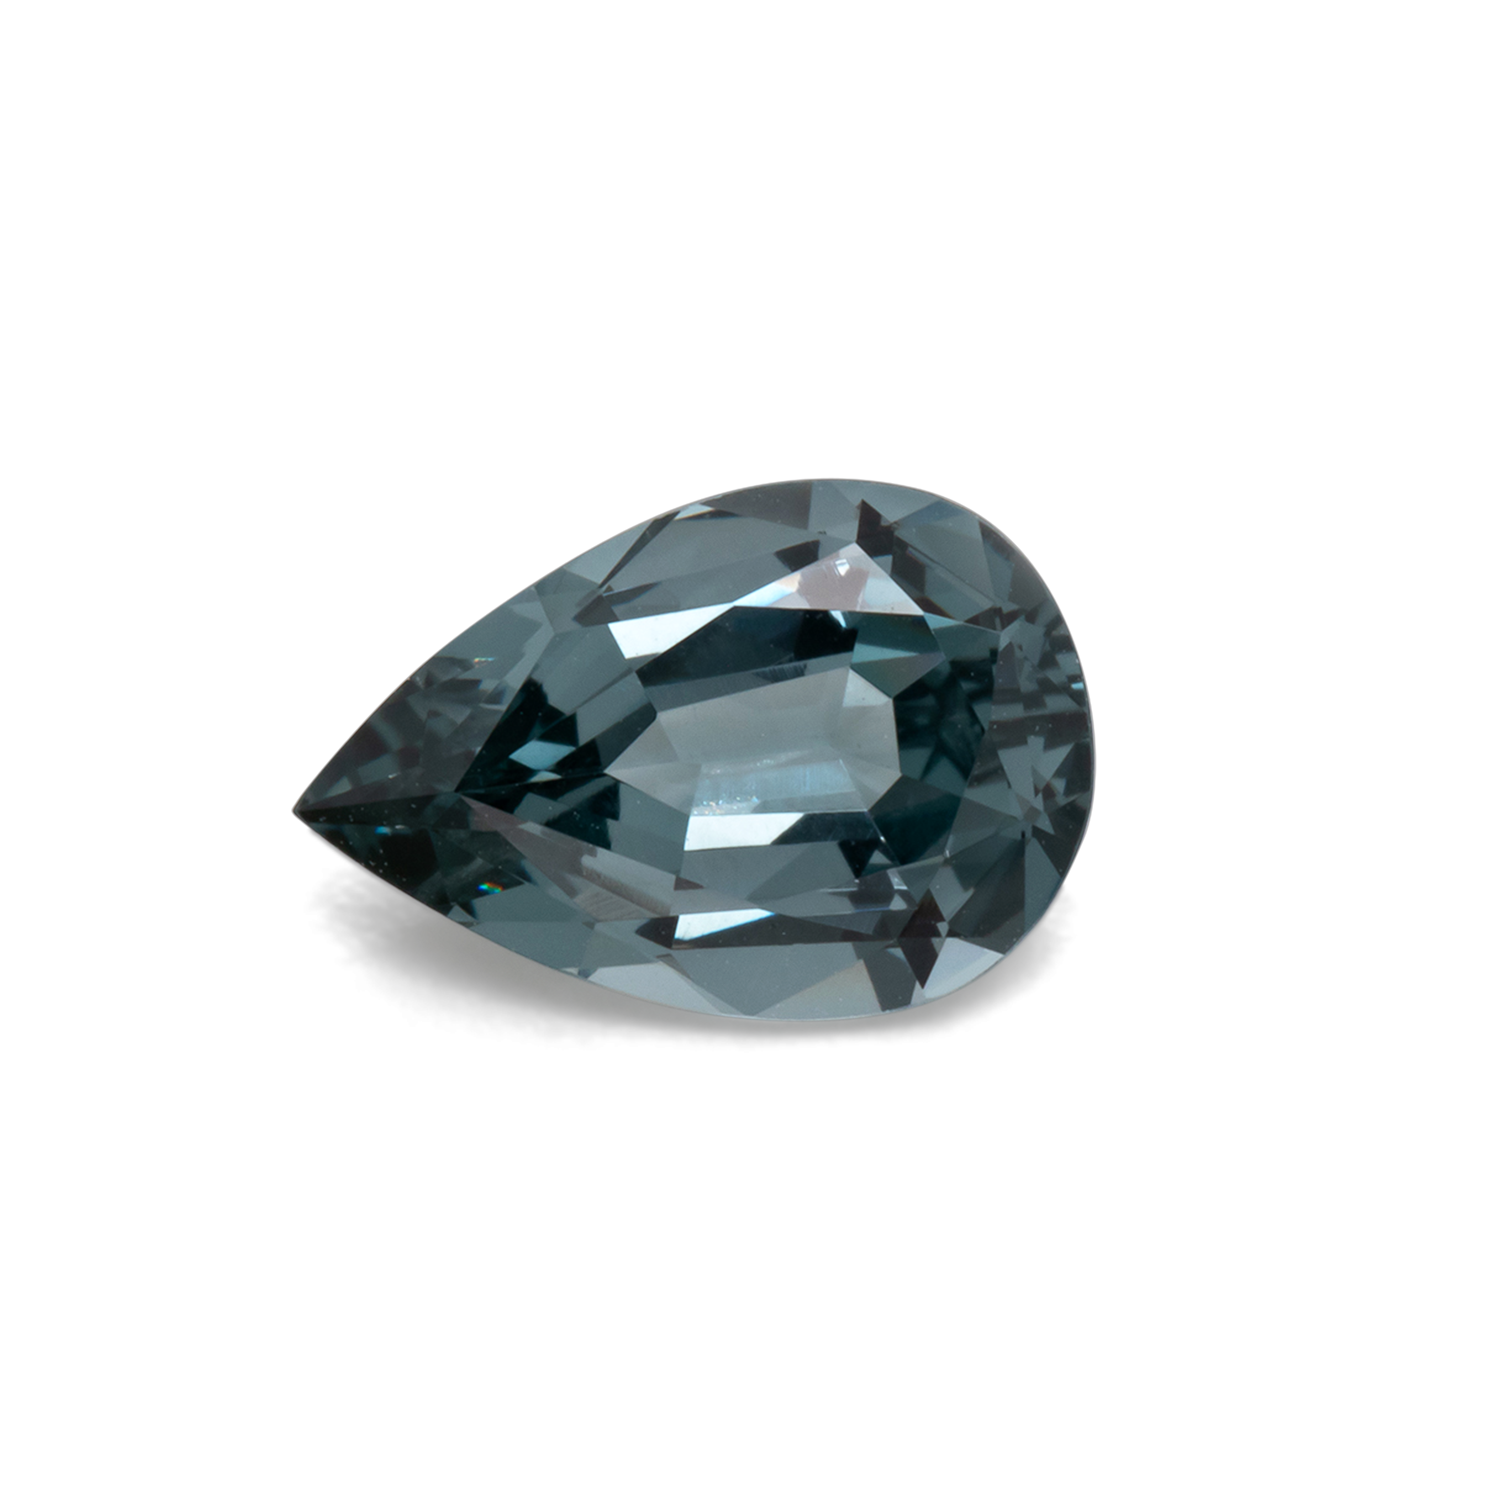 Spinel - grey, pearshape, 10.4x7 mm, 1.96 cts, No. SP90047